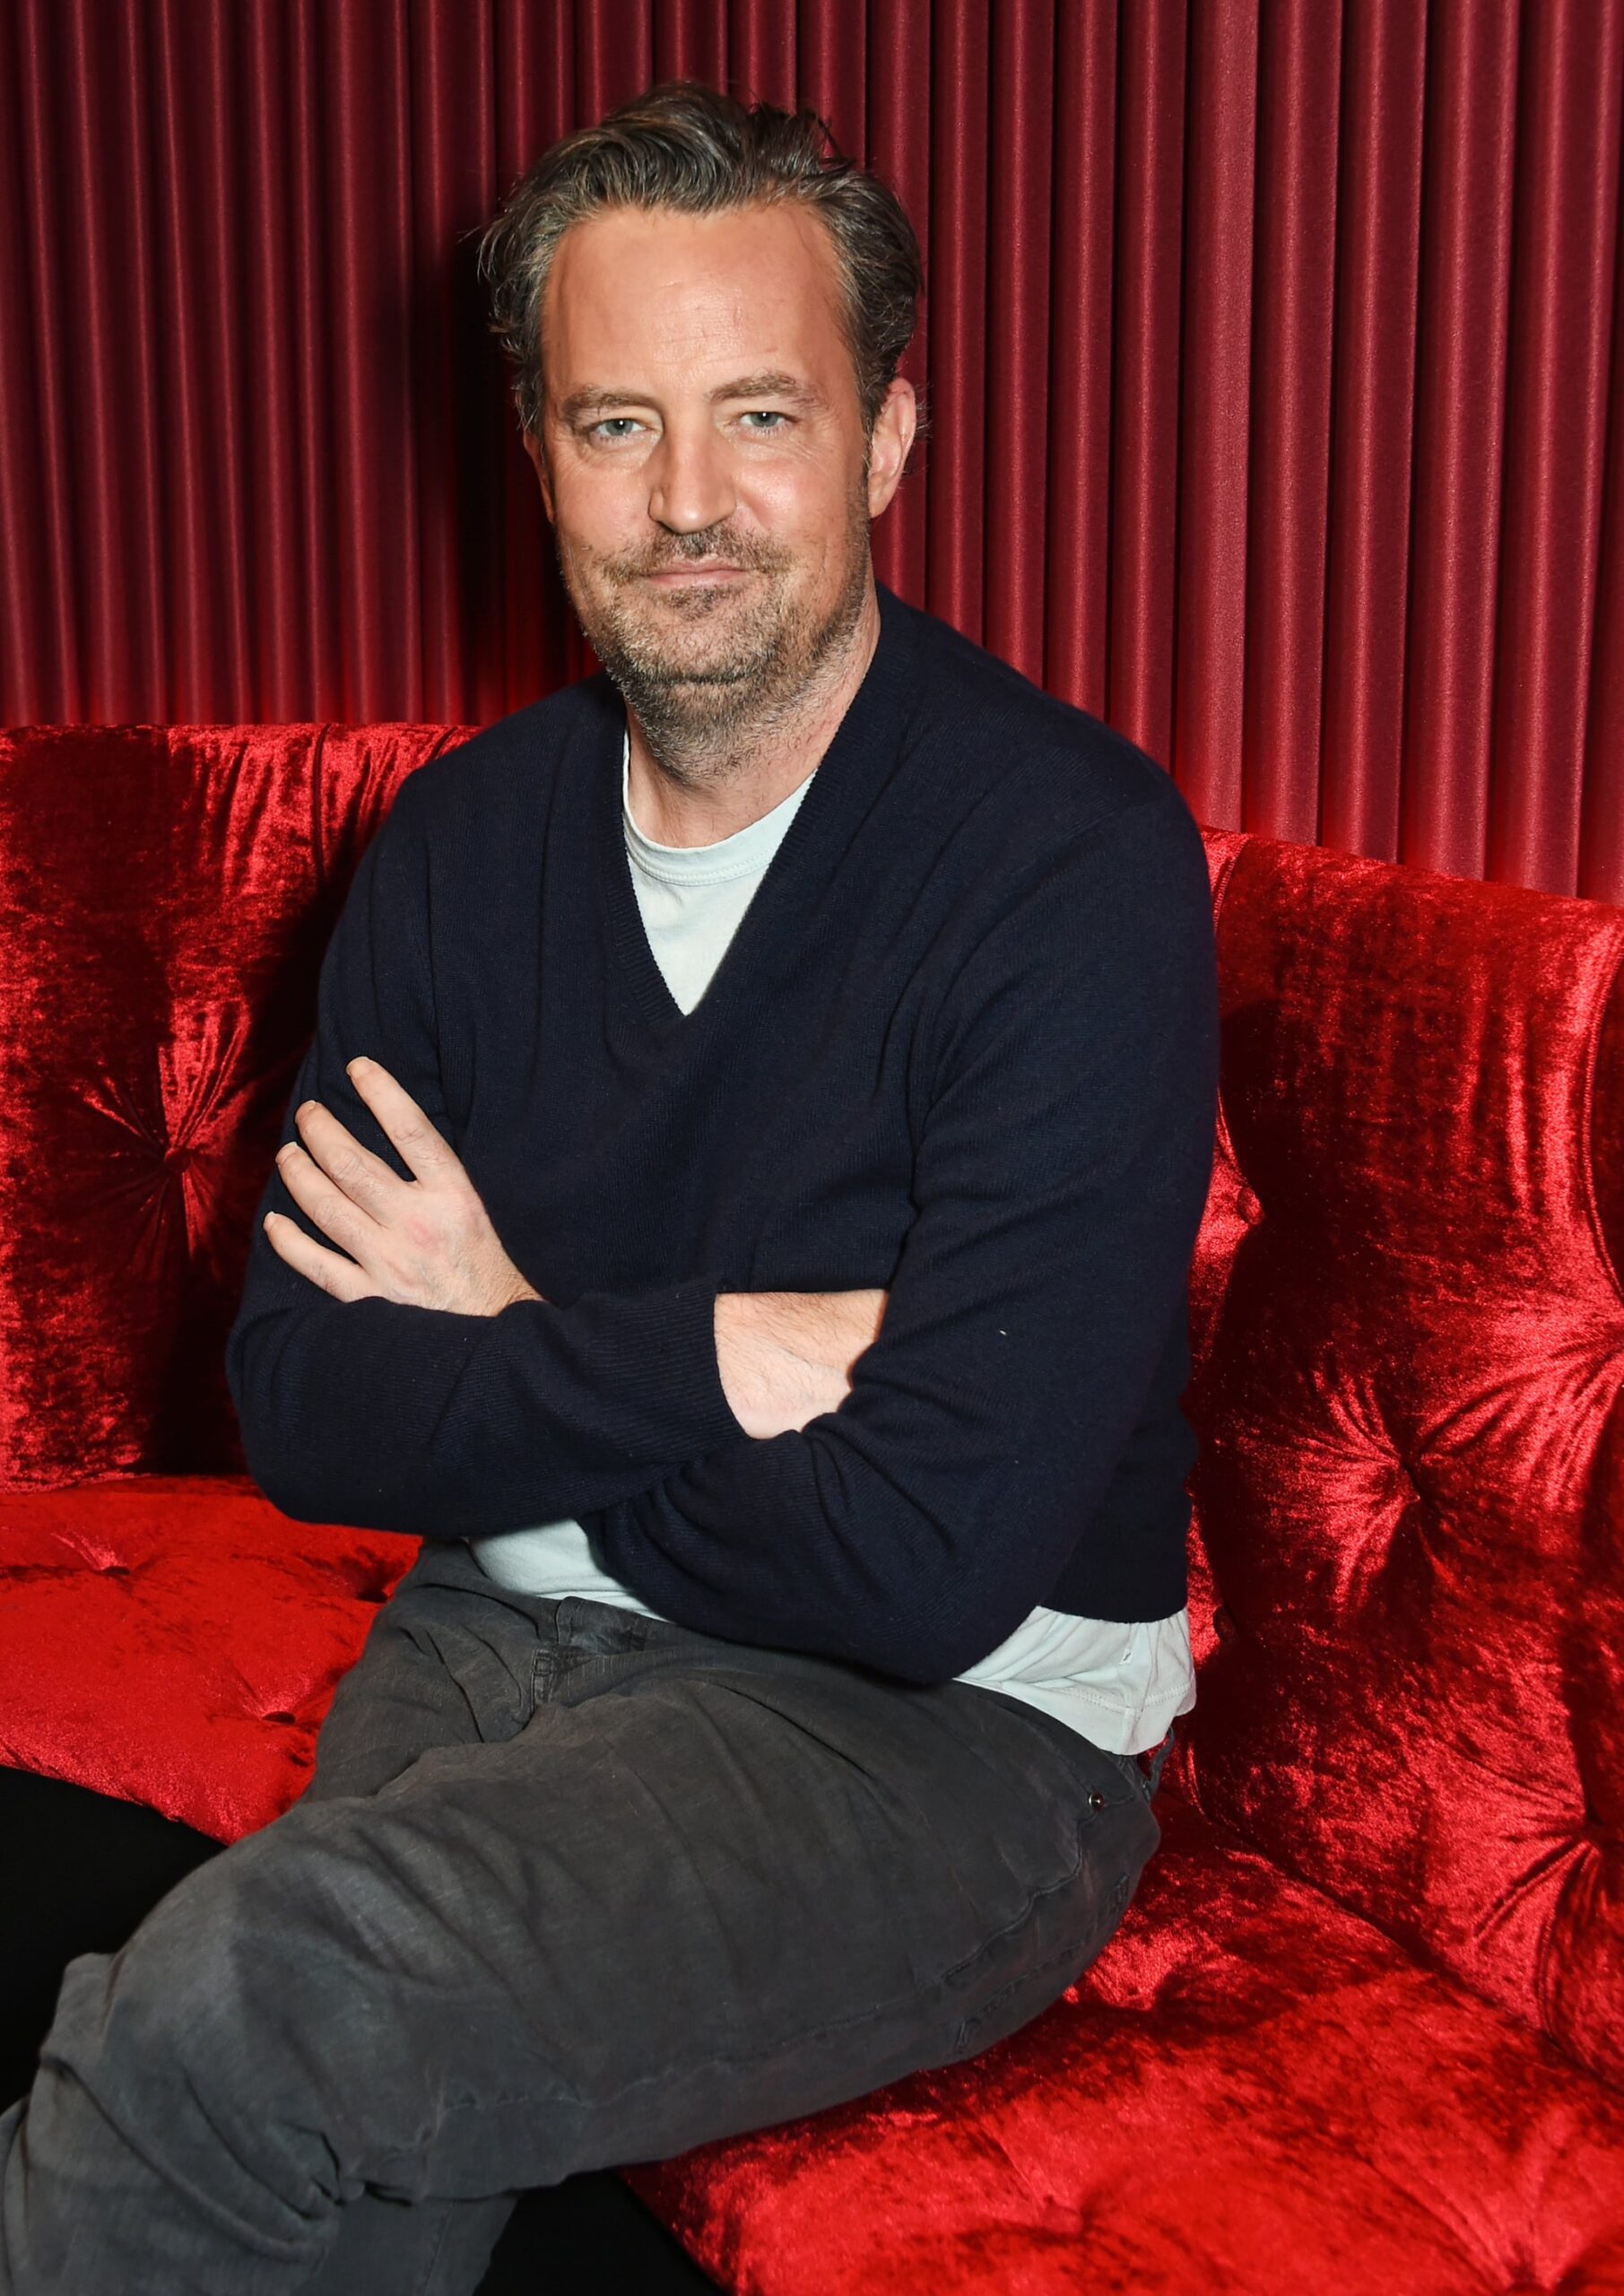 “It’s Not Fair”: Matthew Perry Shares Honest Reaction to the Disease of Addiction